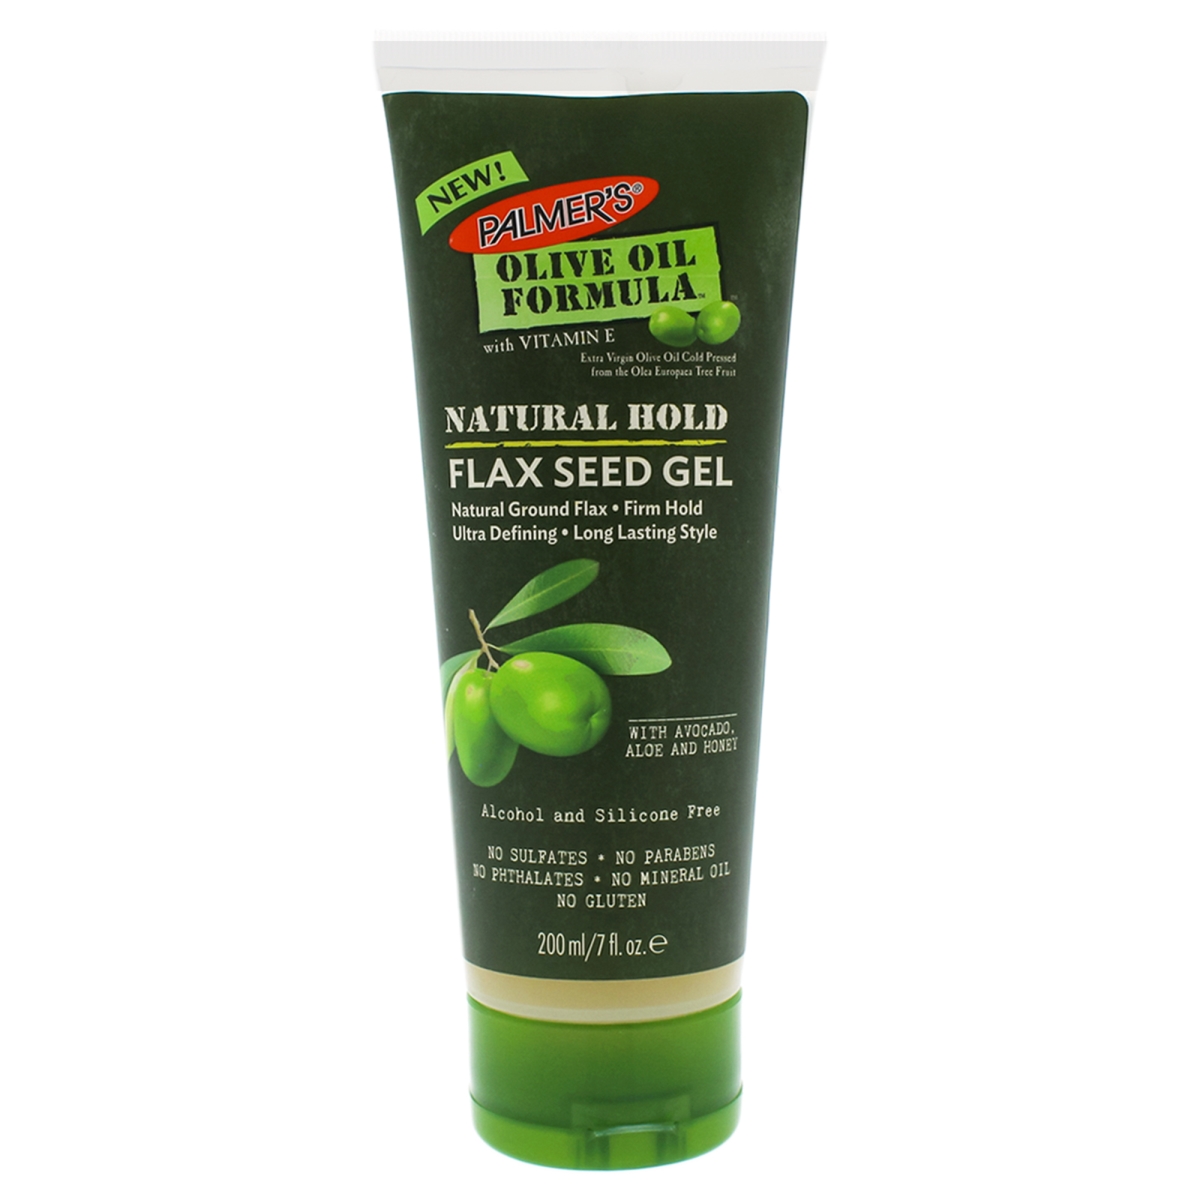 I0088458 Olive Oil Natural Hold Flax Seed Gel For Unisex - 7 Oz